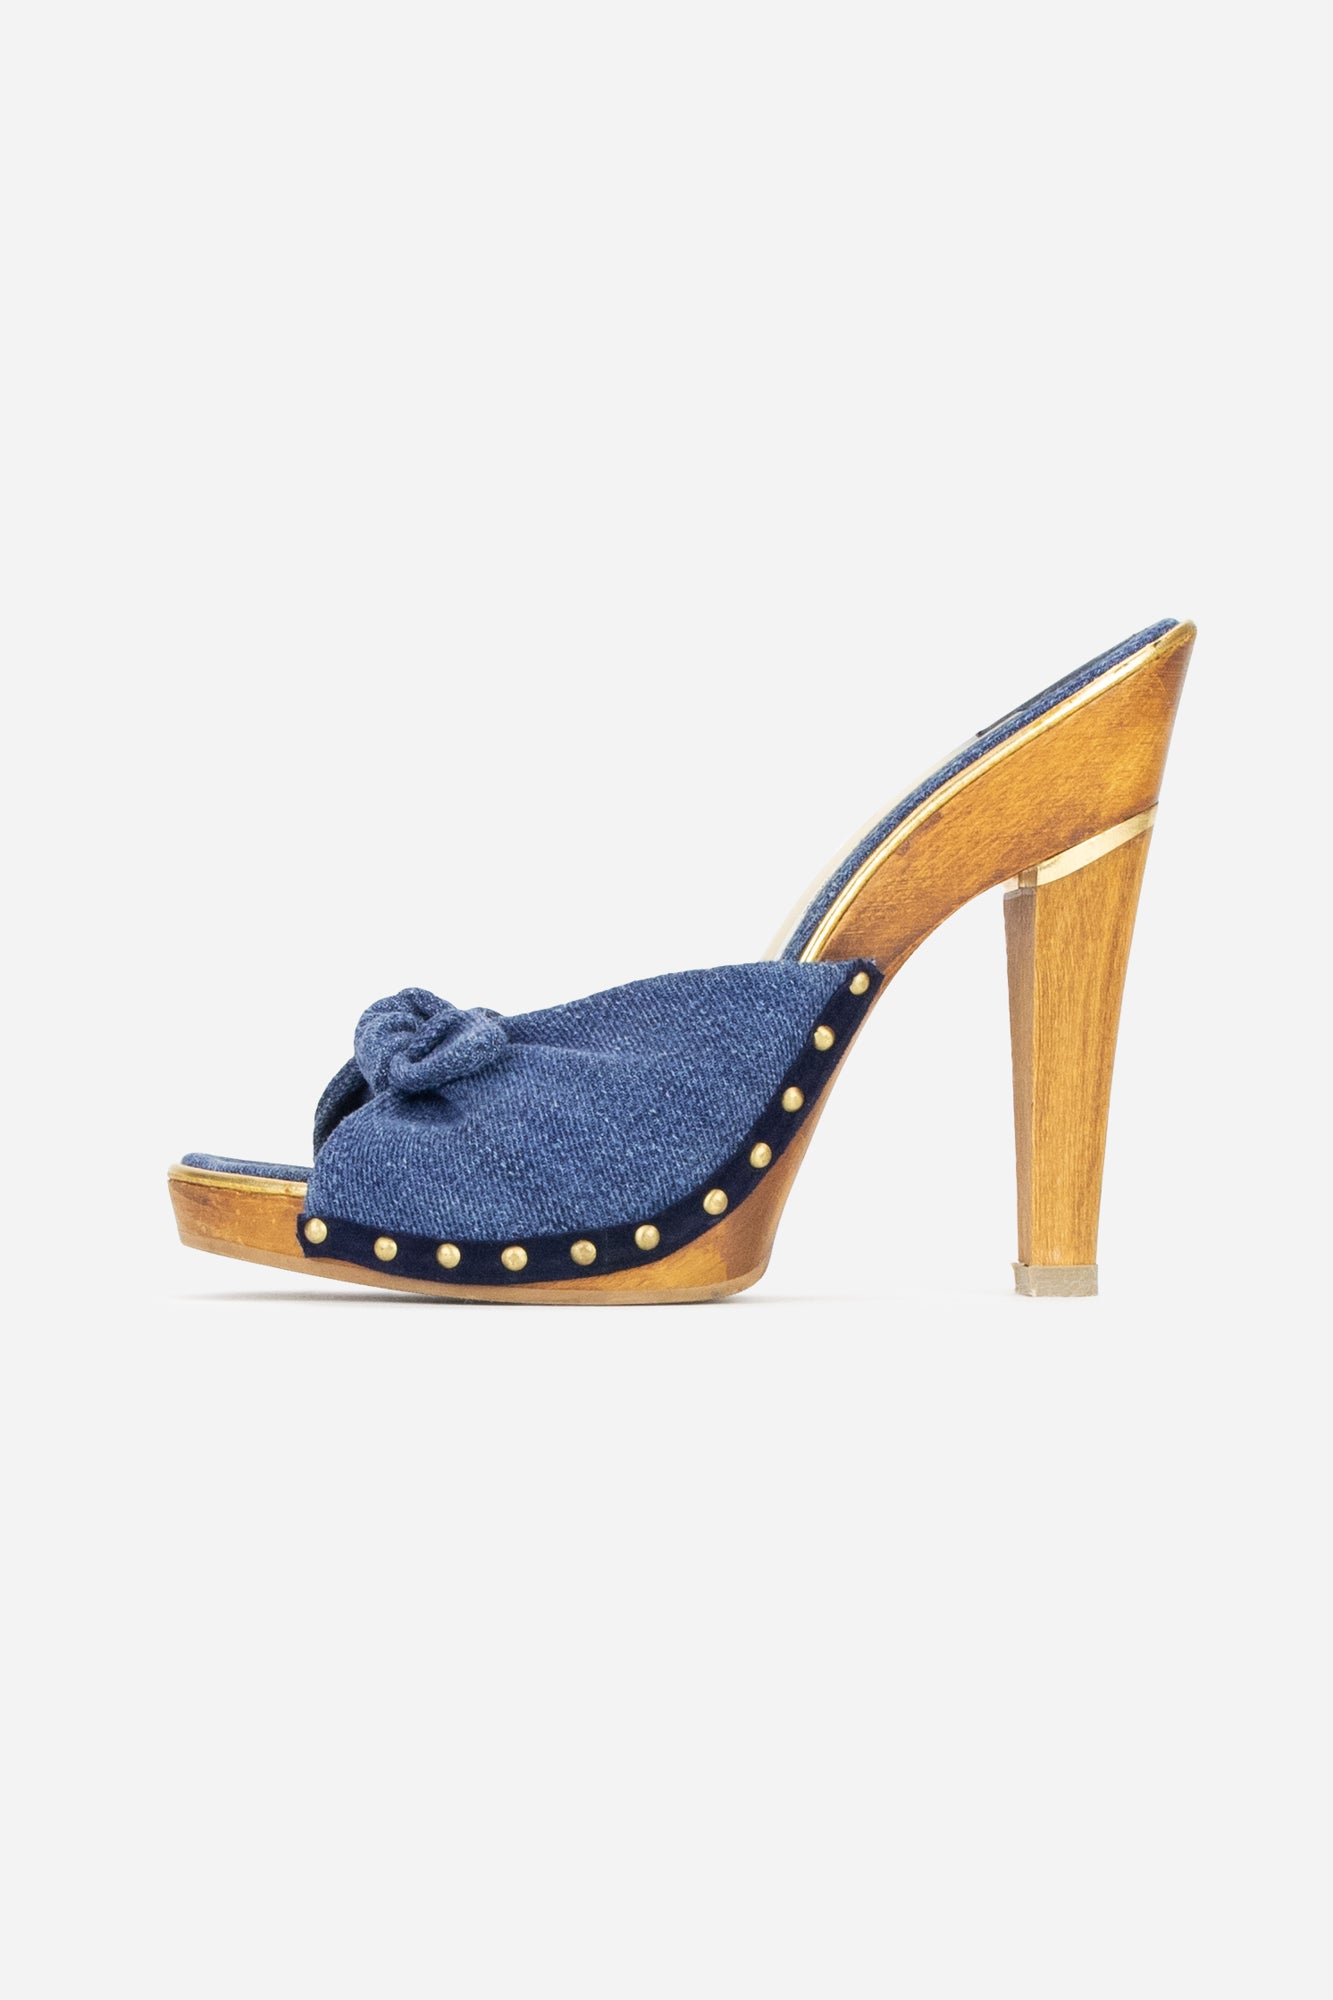 Denim Bow Detailed Heeled Mule Sandals - So Over It Luxury Consignment